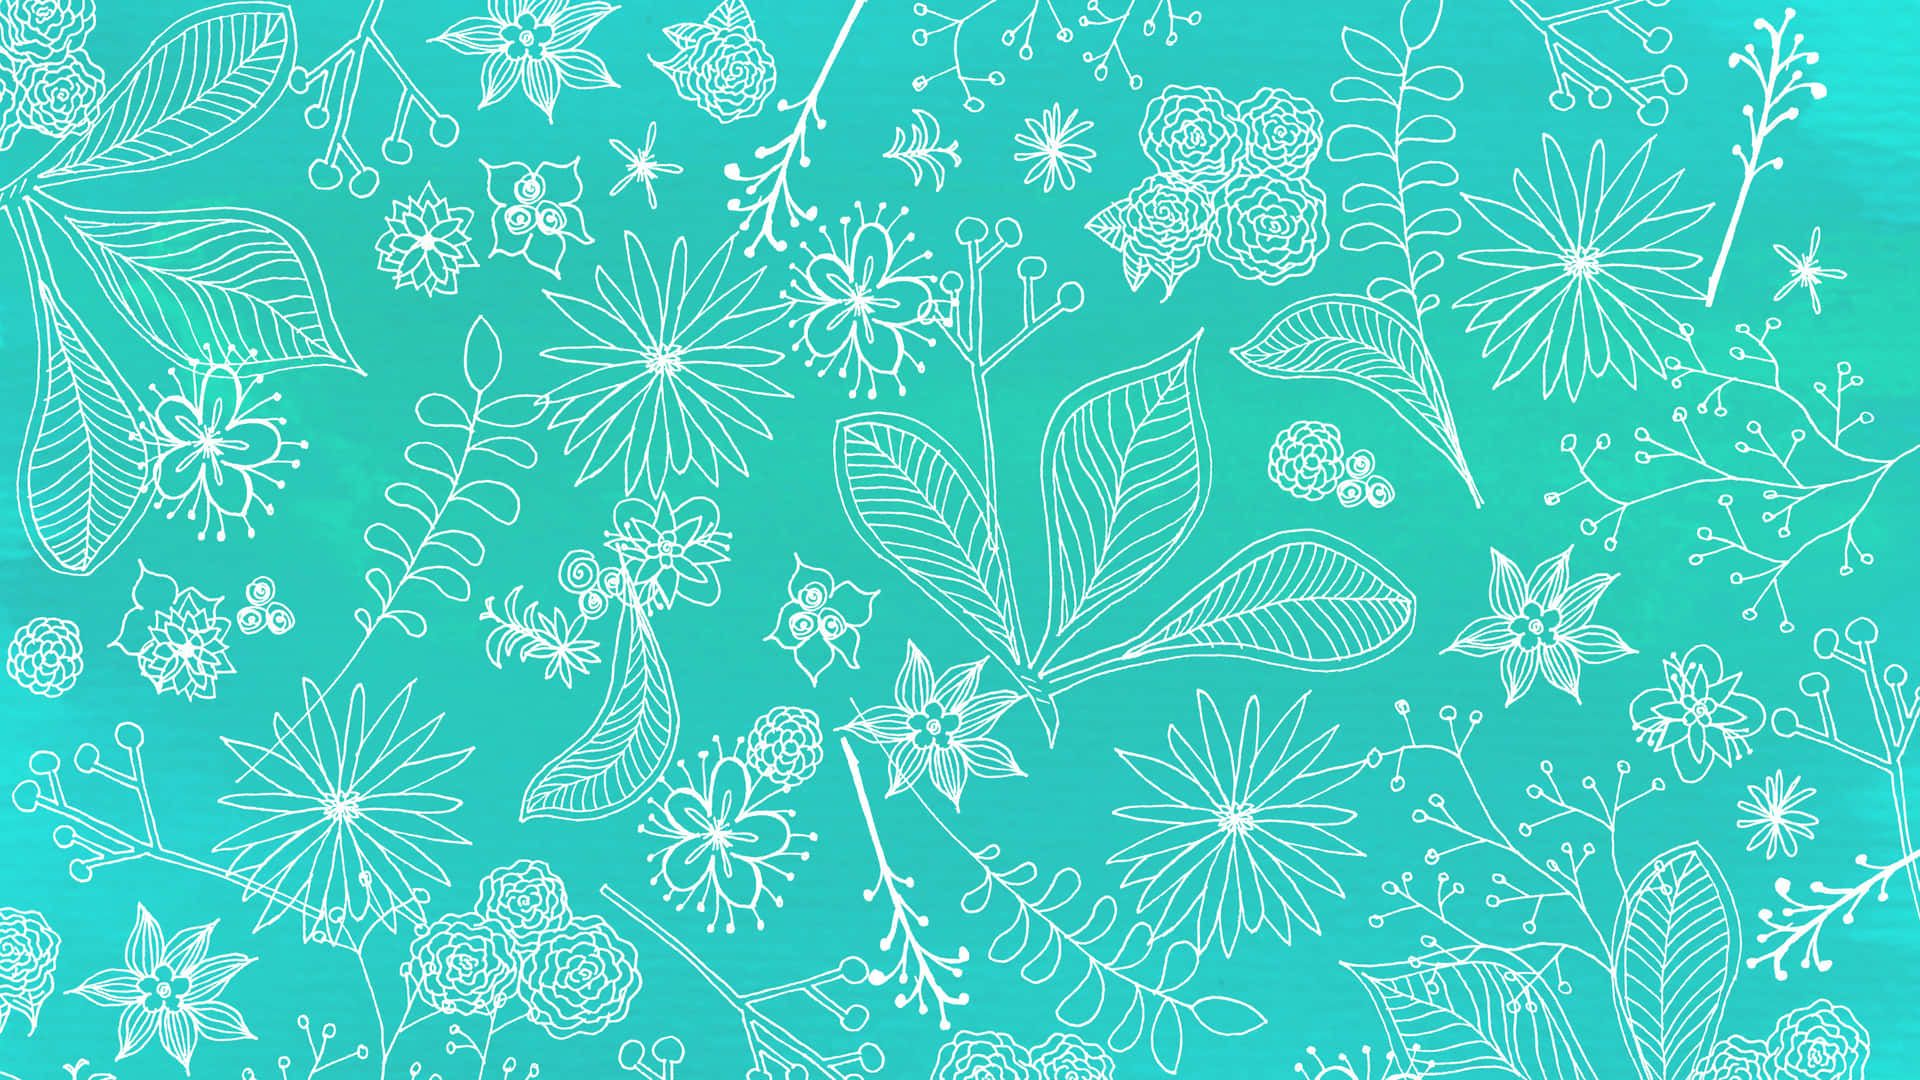 Download A White And Green Floral Pattern On A Turquoise Background Wallpaper